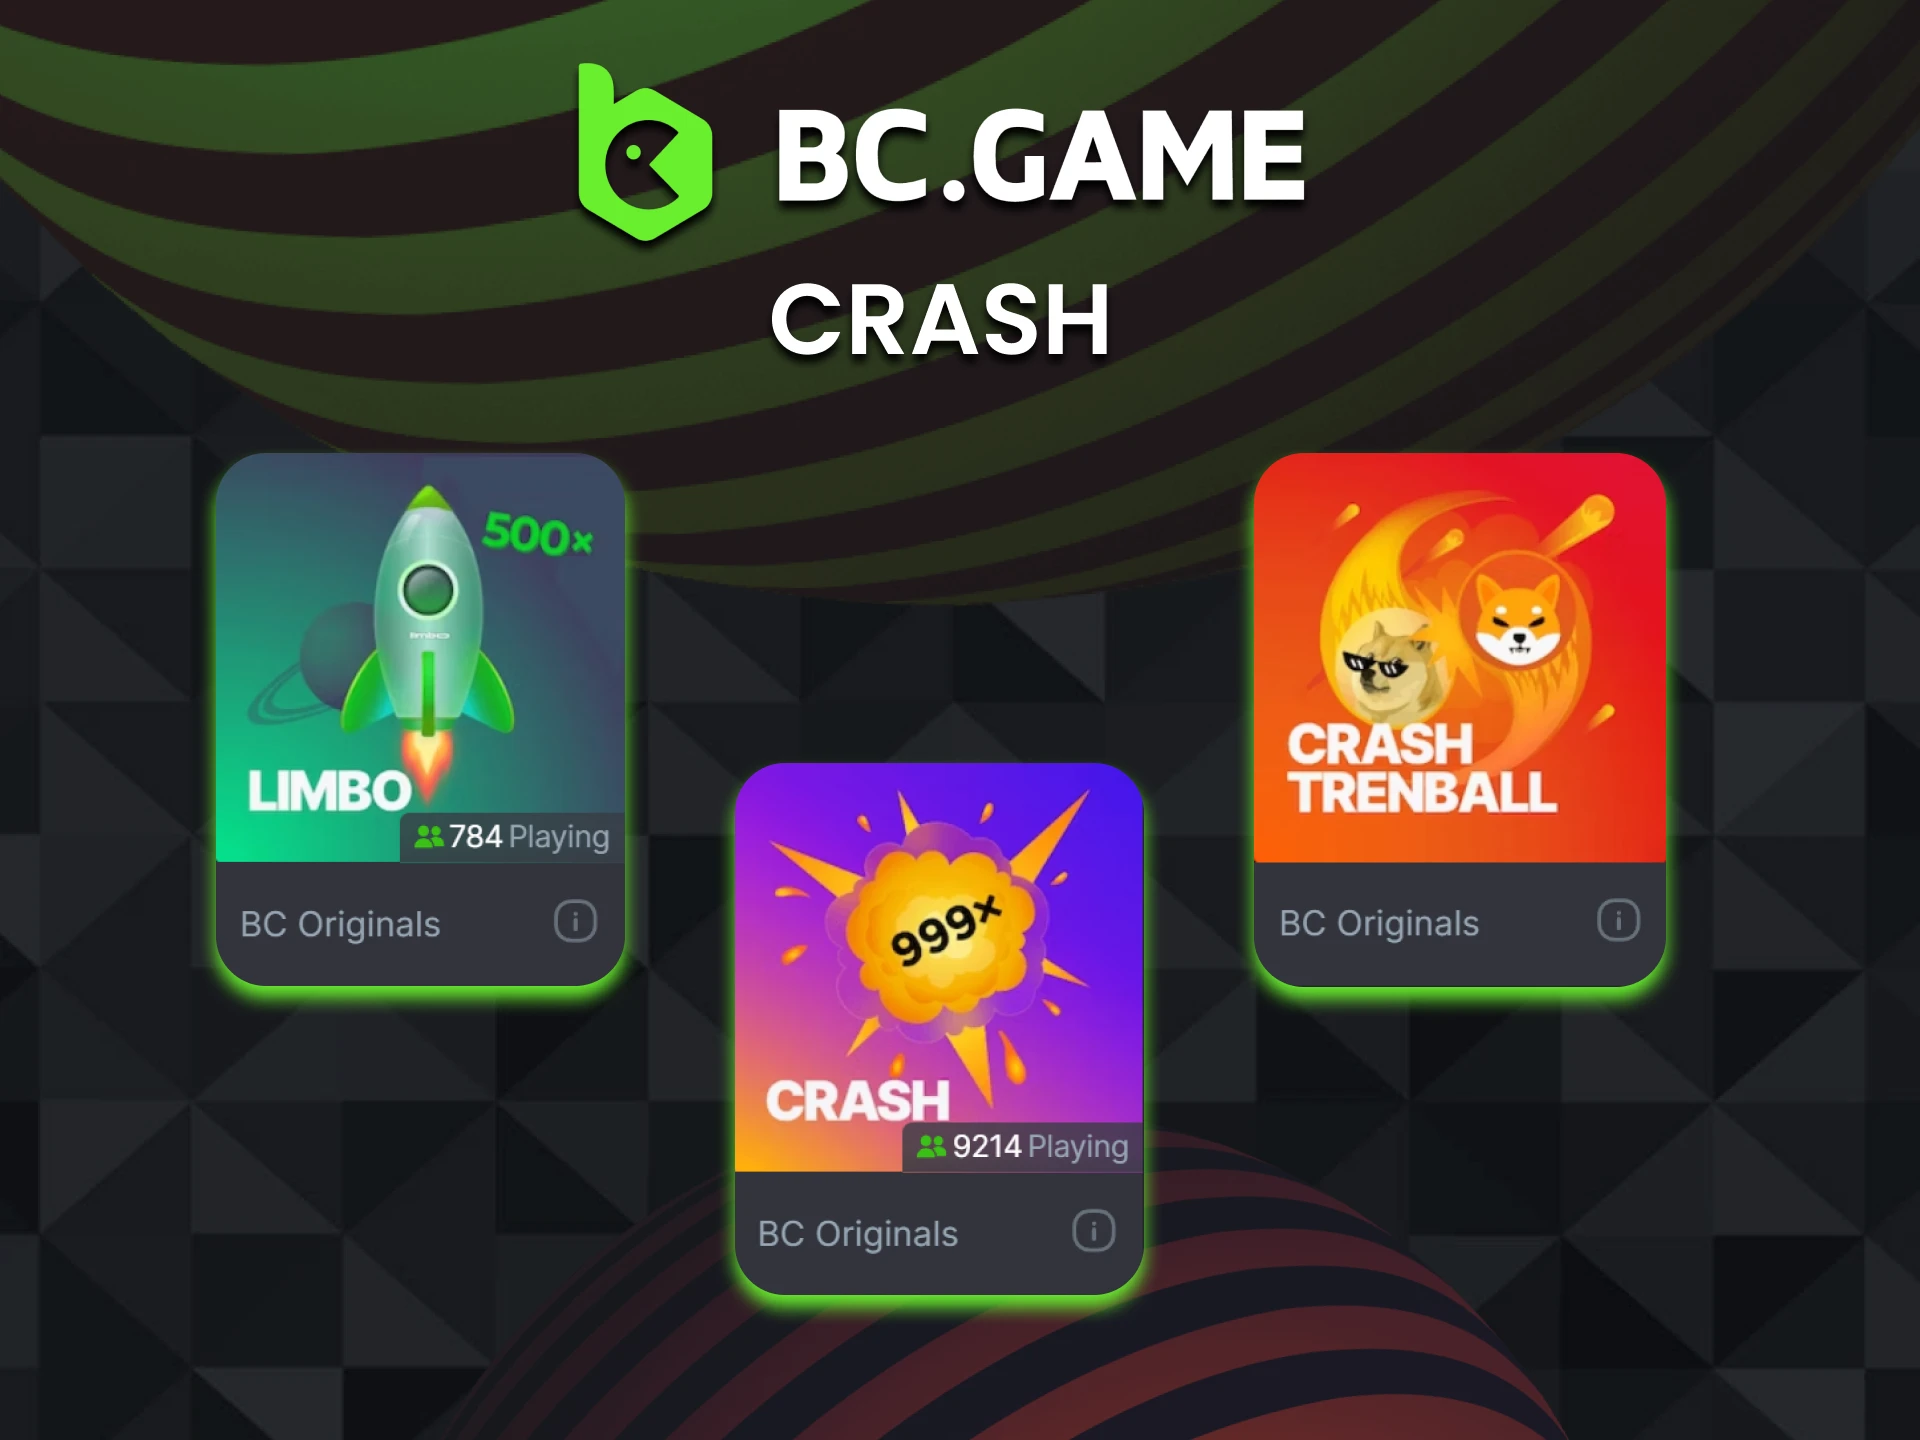 There are lots of Crash games you can play at BC Game online casino.